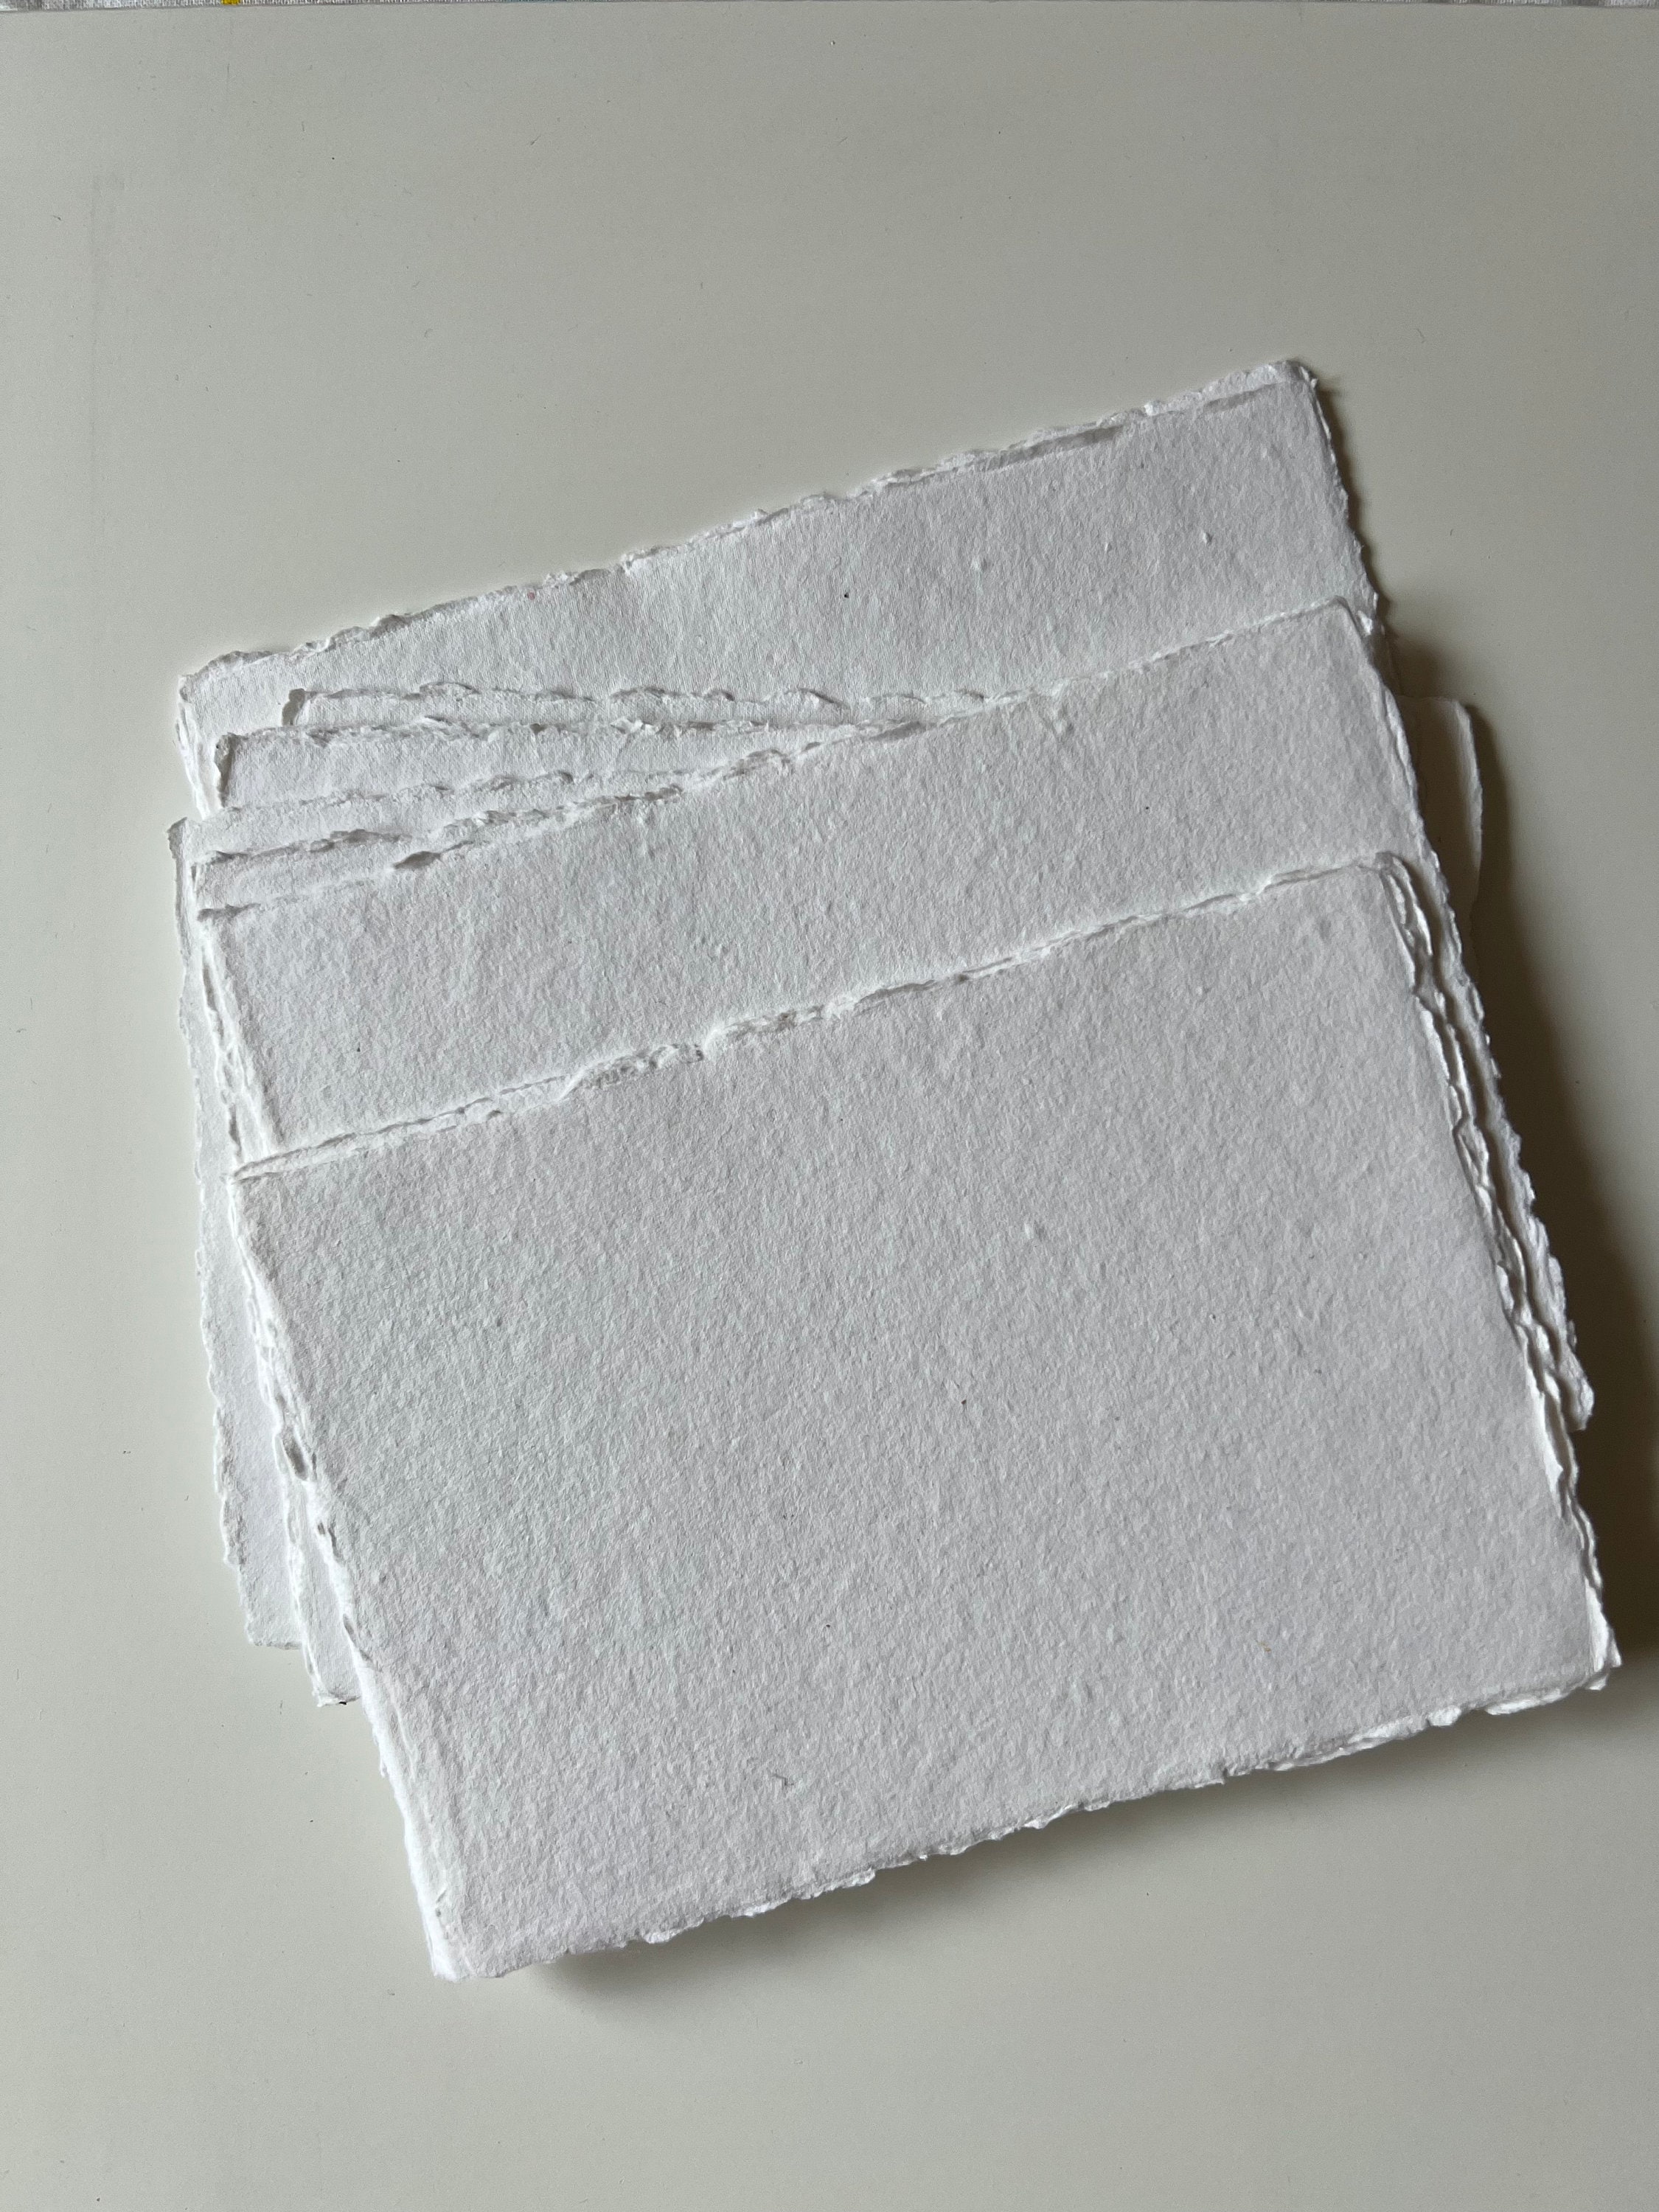 Blank Vintage Handmade Deckled Edge Paper, 75 Sheets of Recycled Cotton  Pape